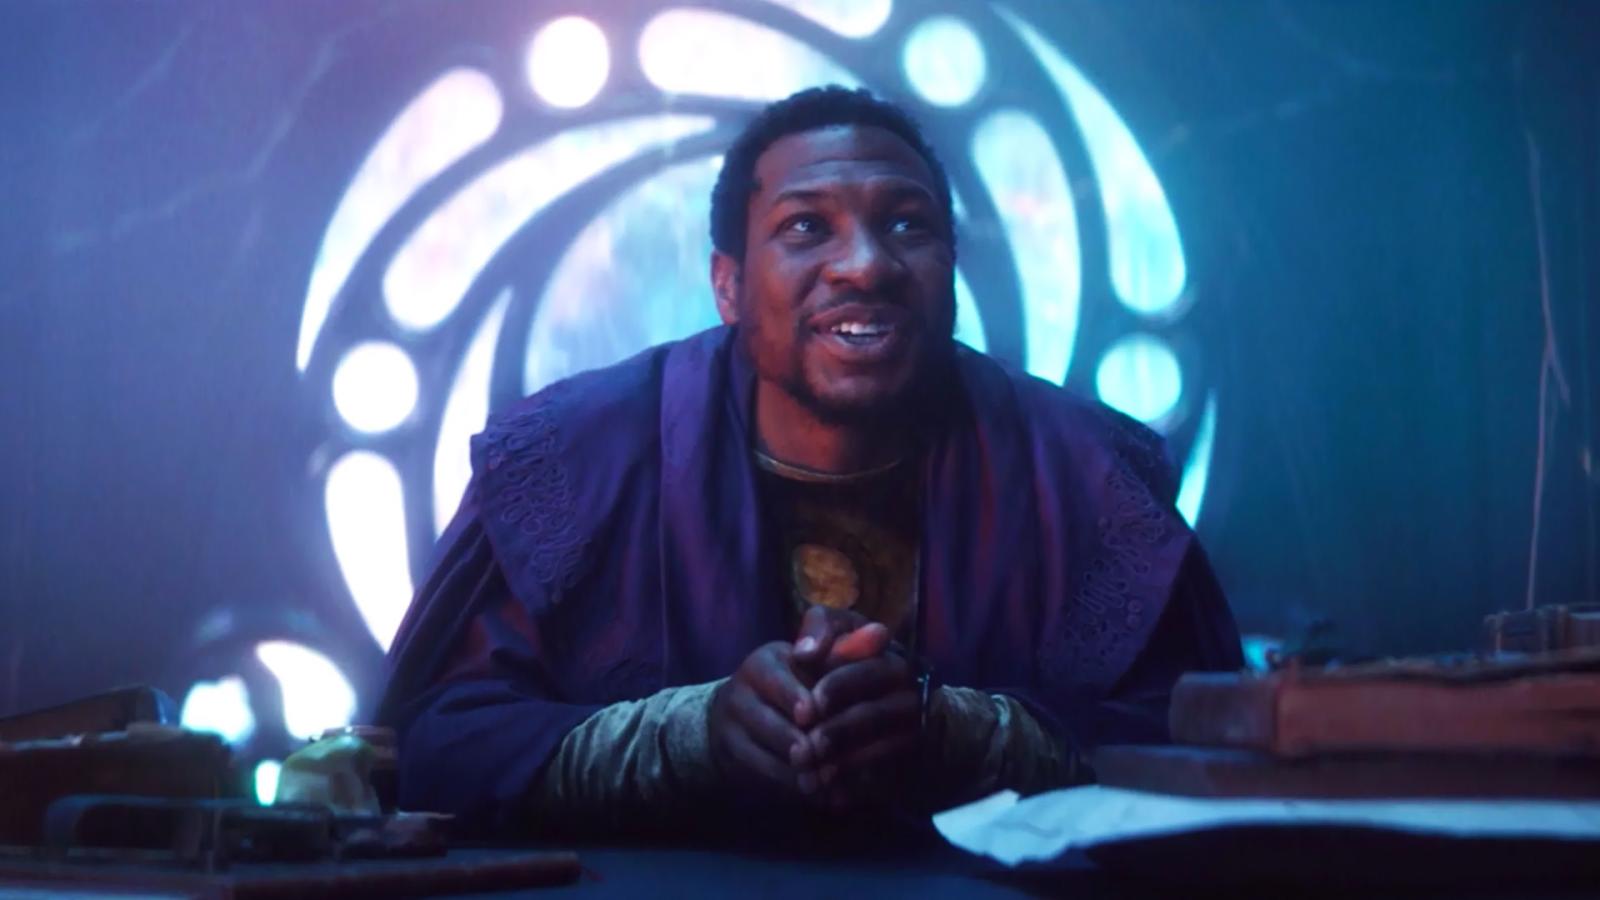 List of Upcoming Jonathan Majors Movies Possibly Derailed After His Arrest - image 1